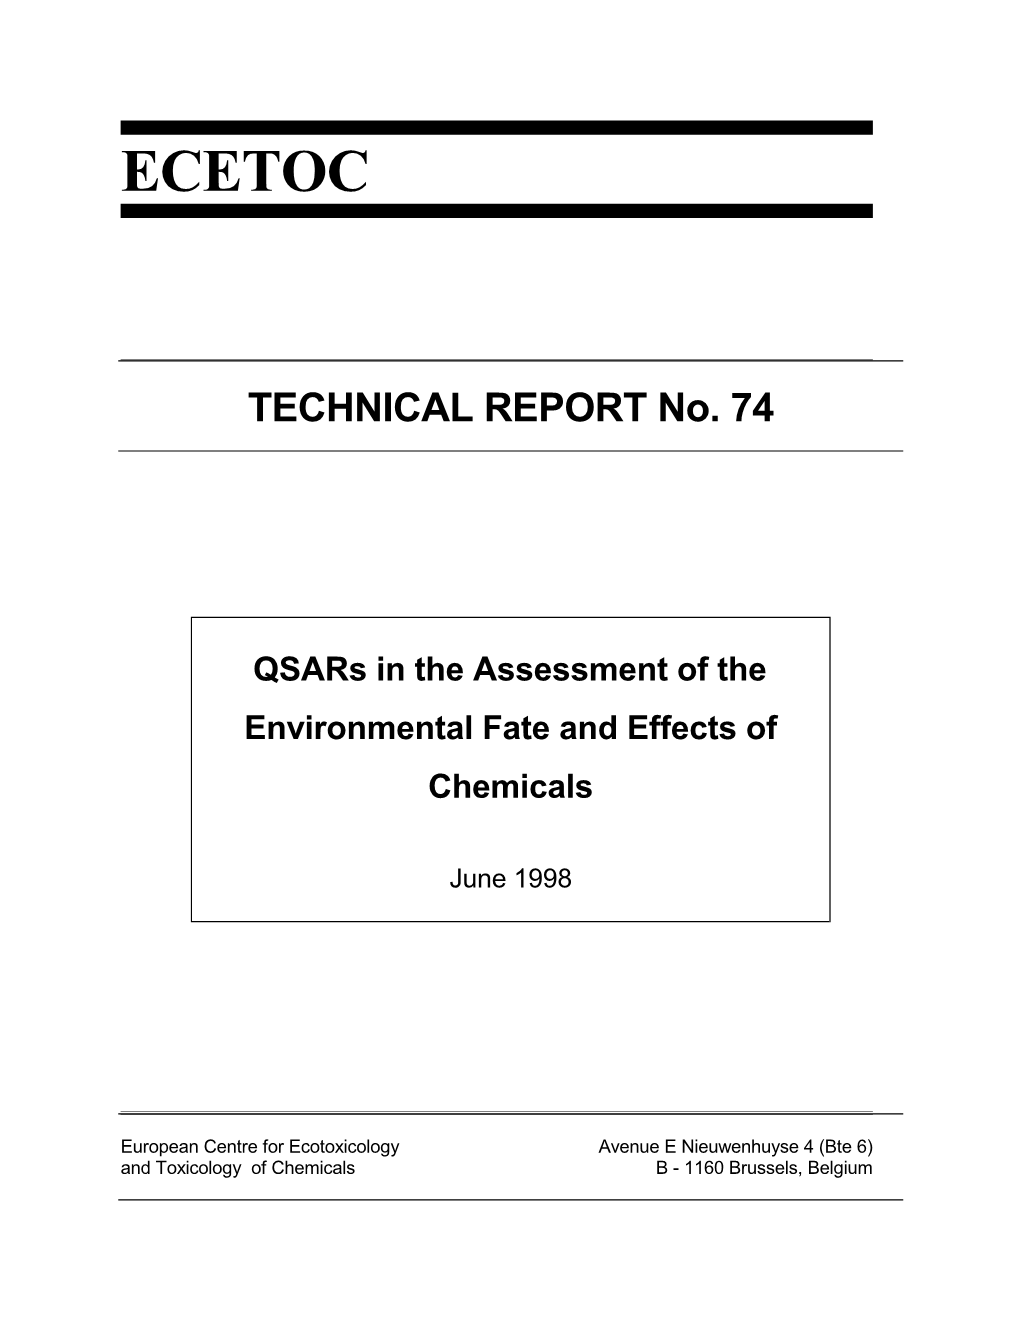 Qsars in the Assessment of the Environmental Fate and Effects of Chemicals